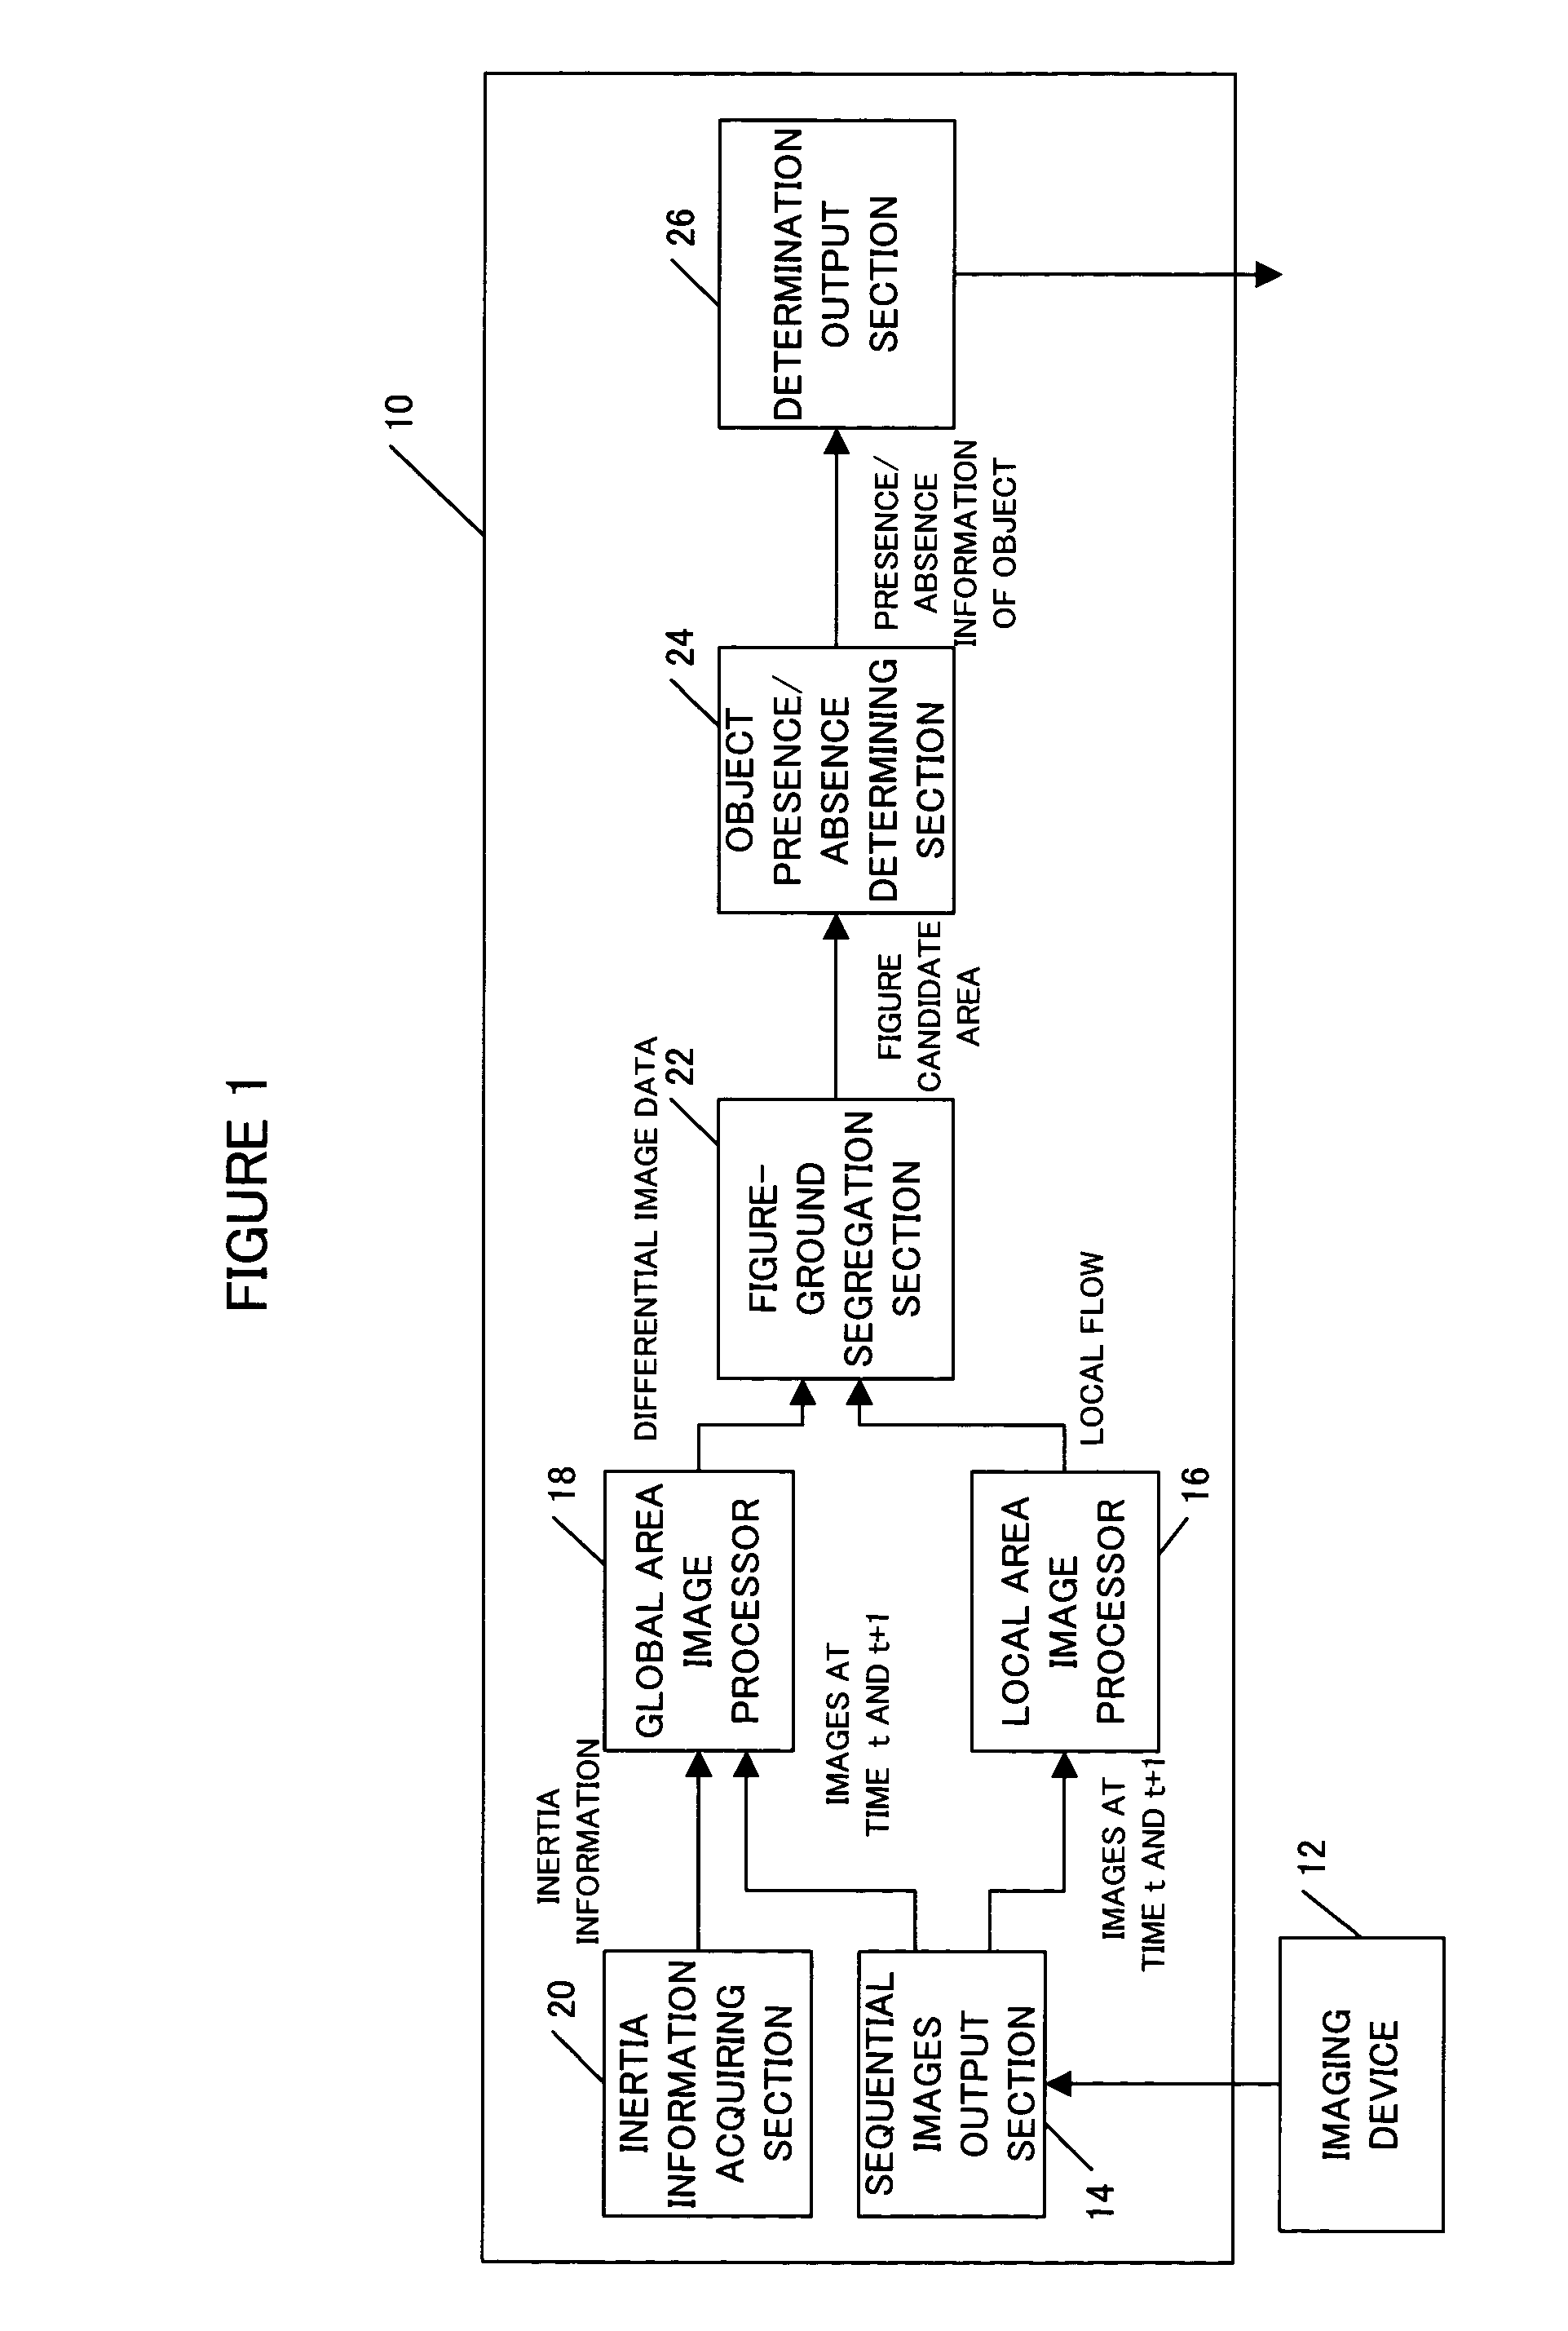 Image-based object detection apparatus and method